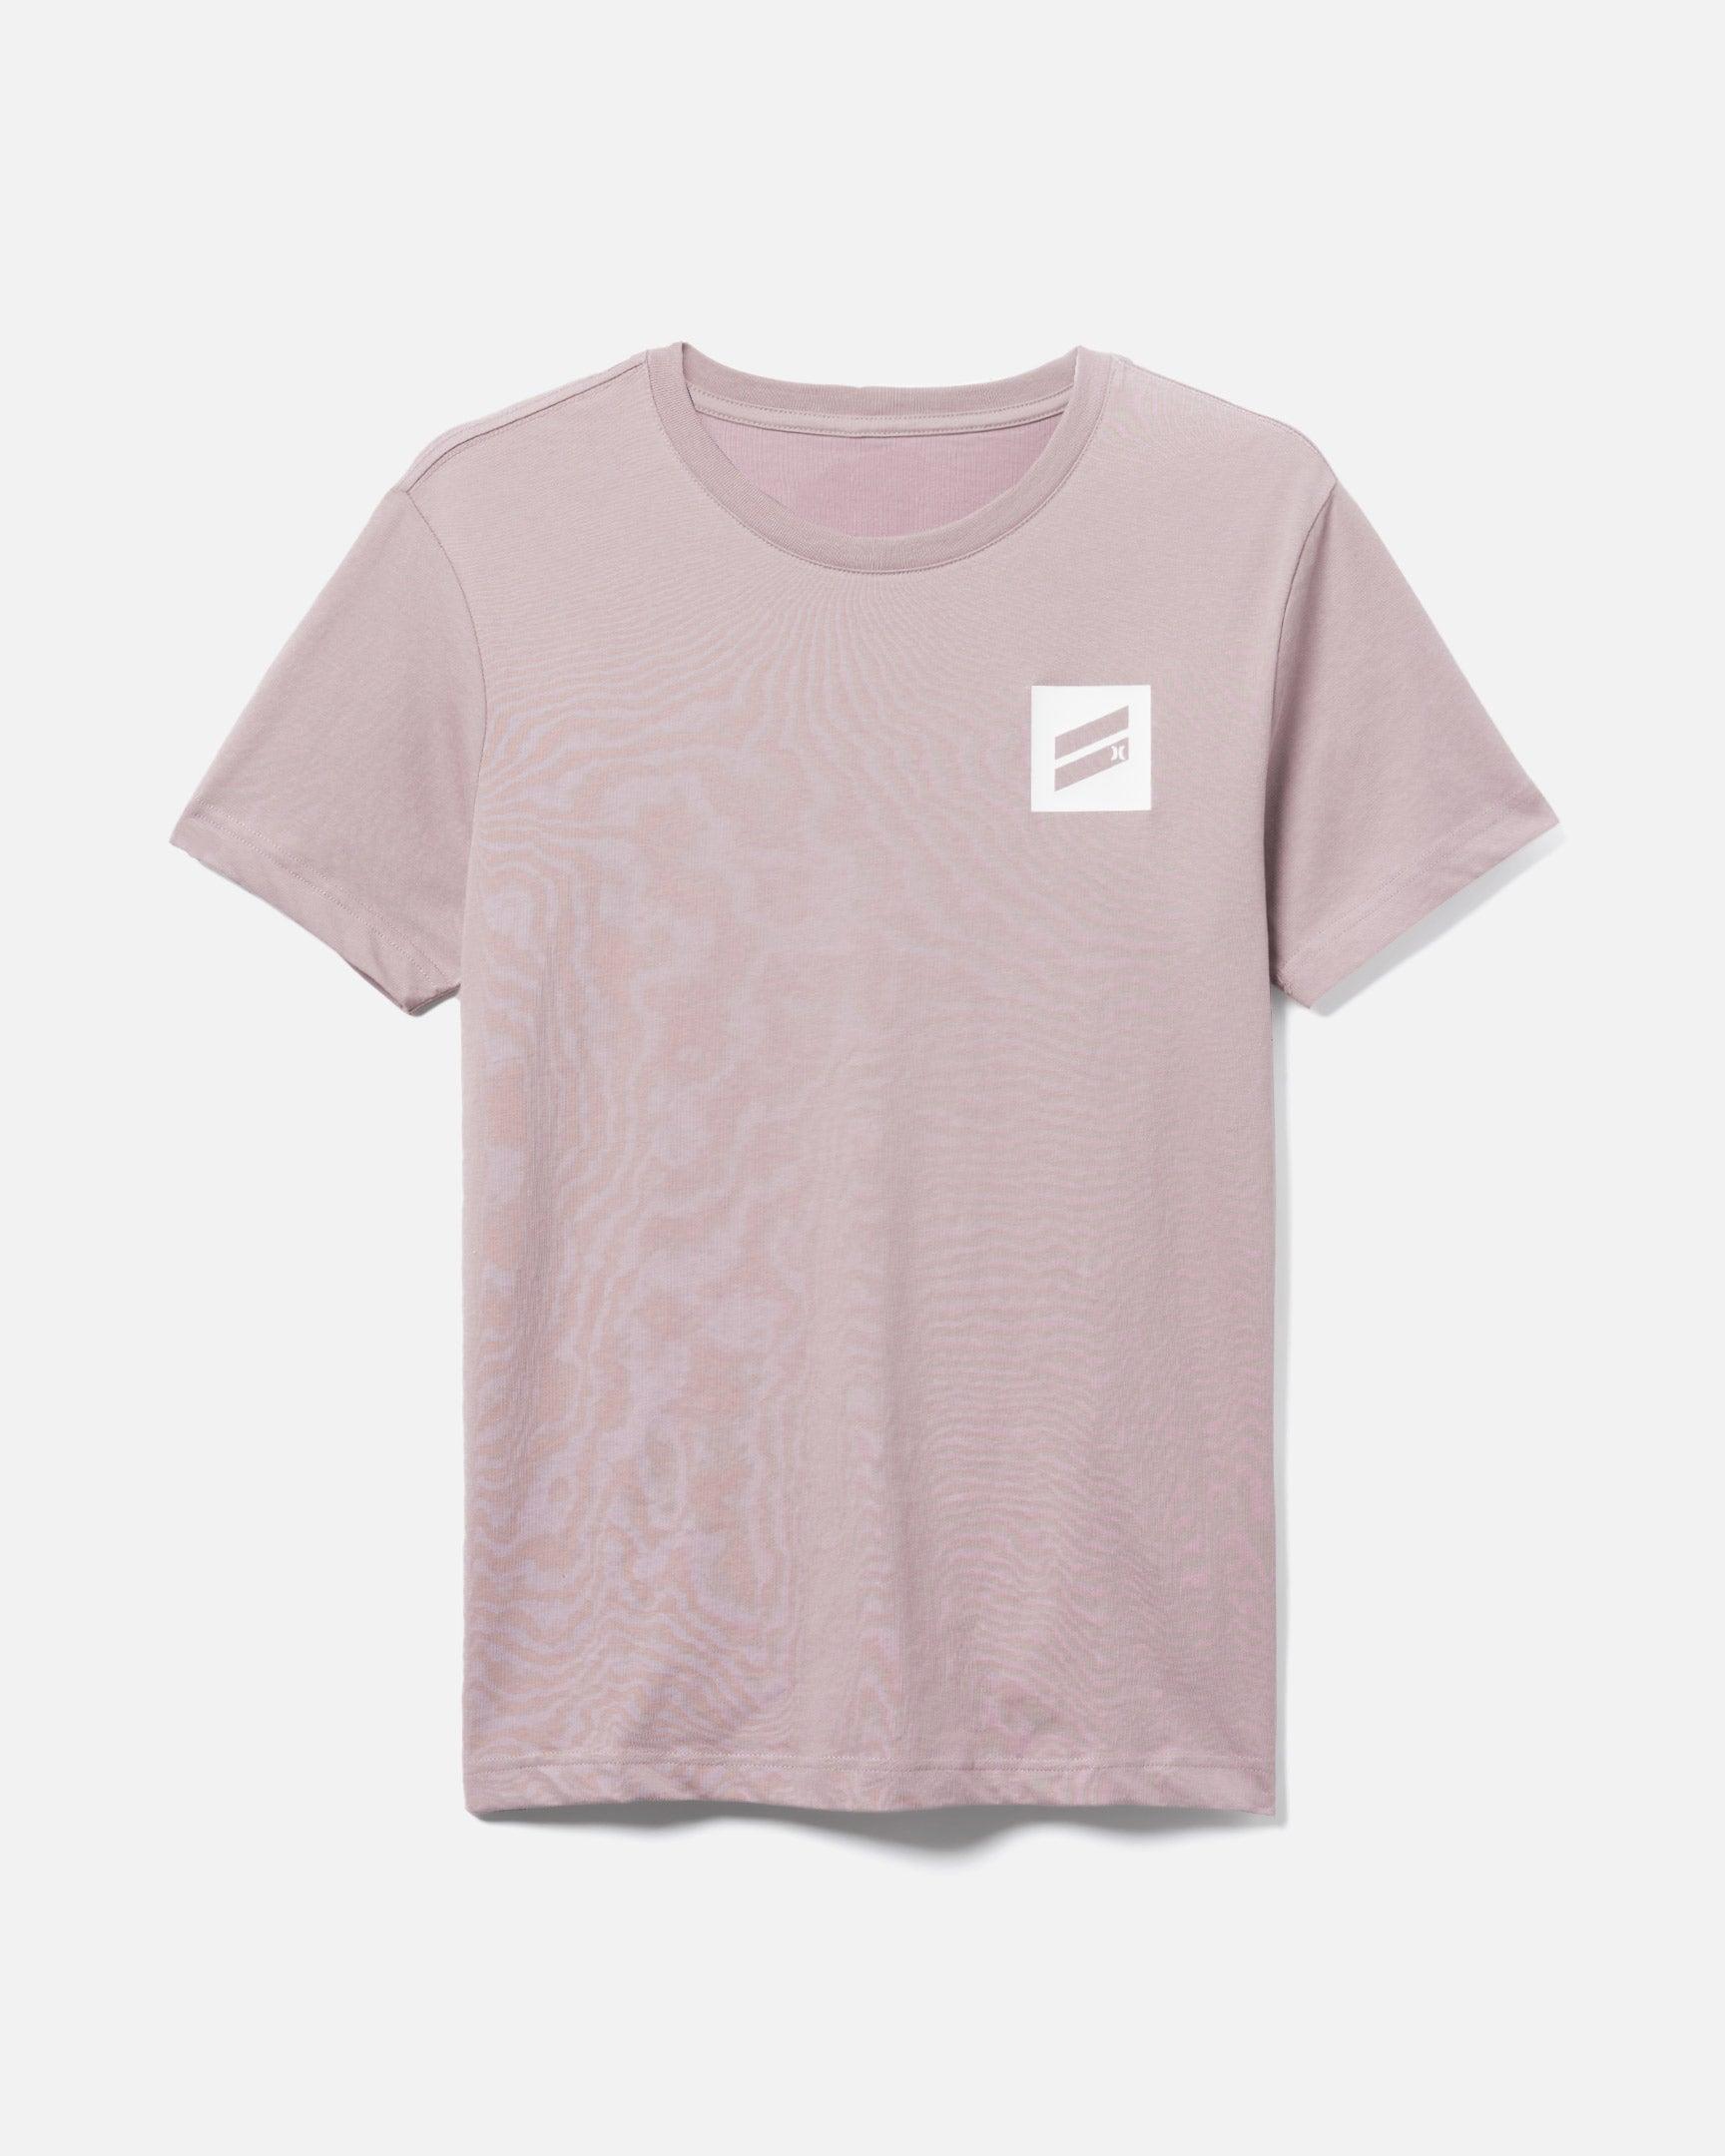 Lilac - Exist Bootcamp Dry Short Sleeve Performance Tee | Hurley